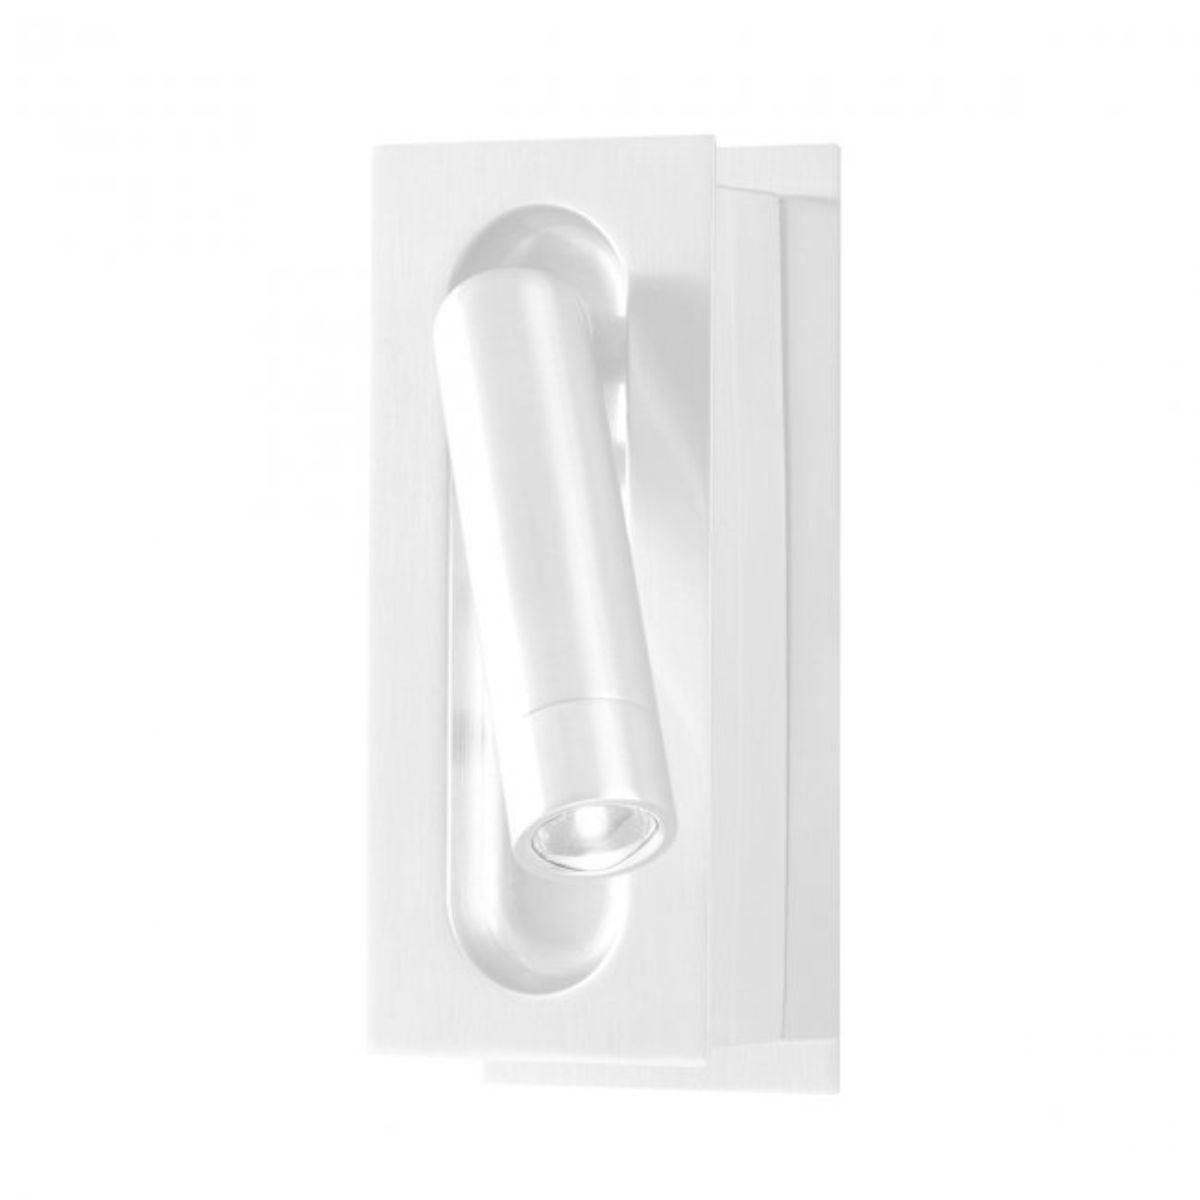 Scope 7 in. LED Wall Sconce with pivotable arm 3000K